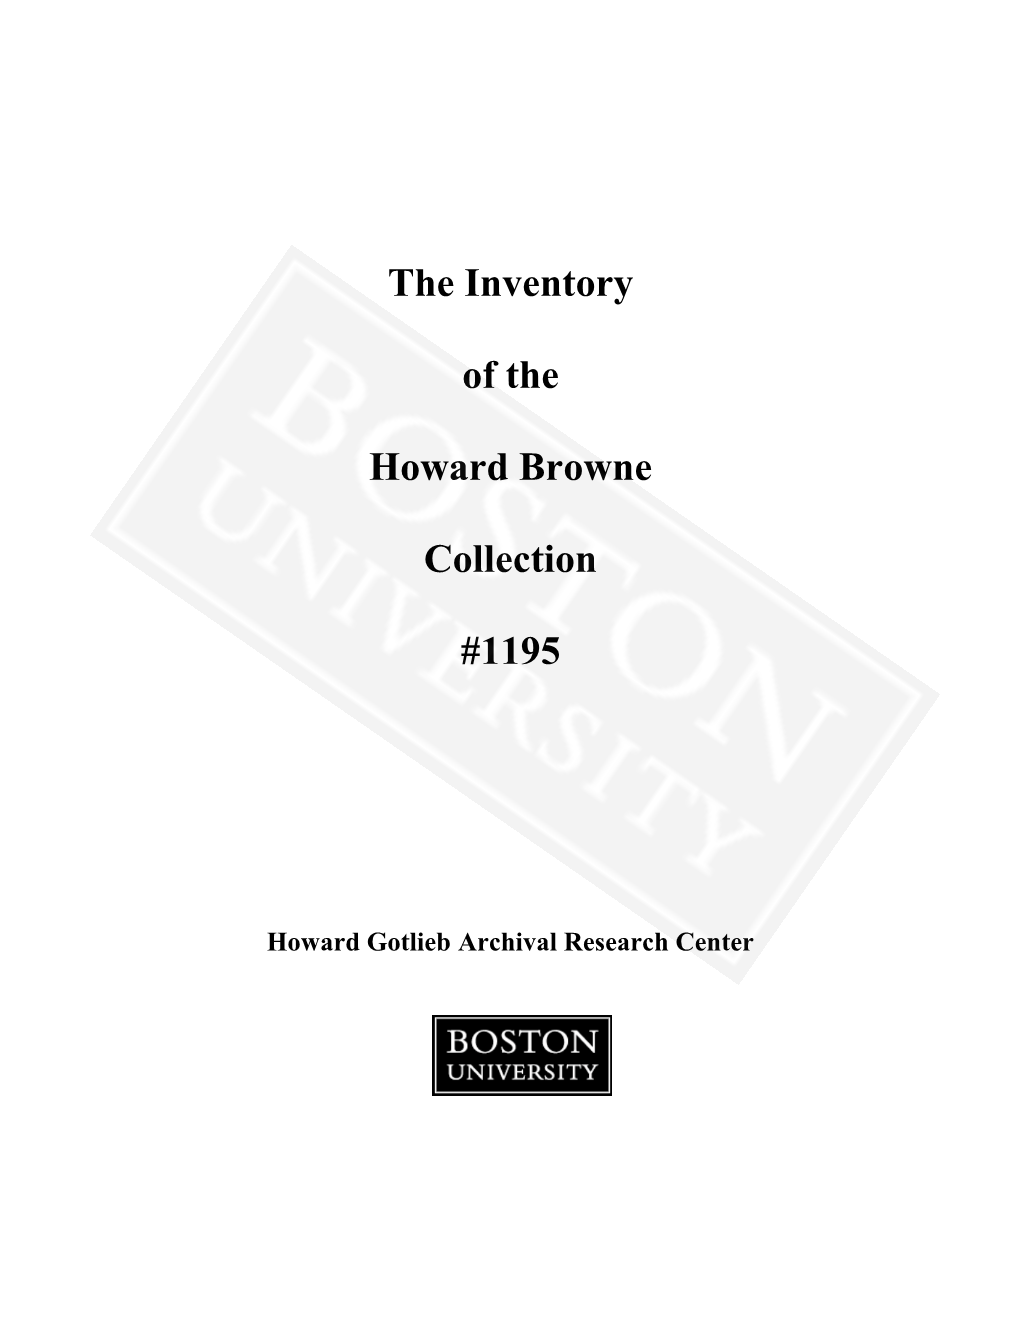 The Inventory of the Howard Browne Collection #1195